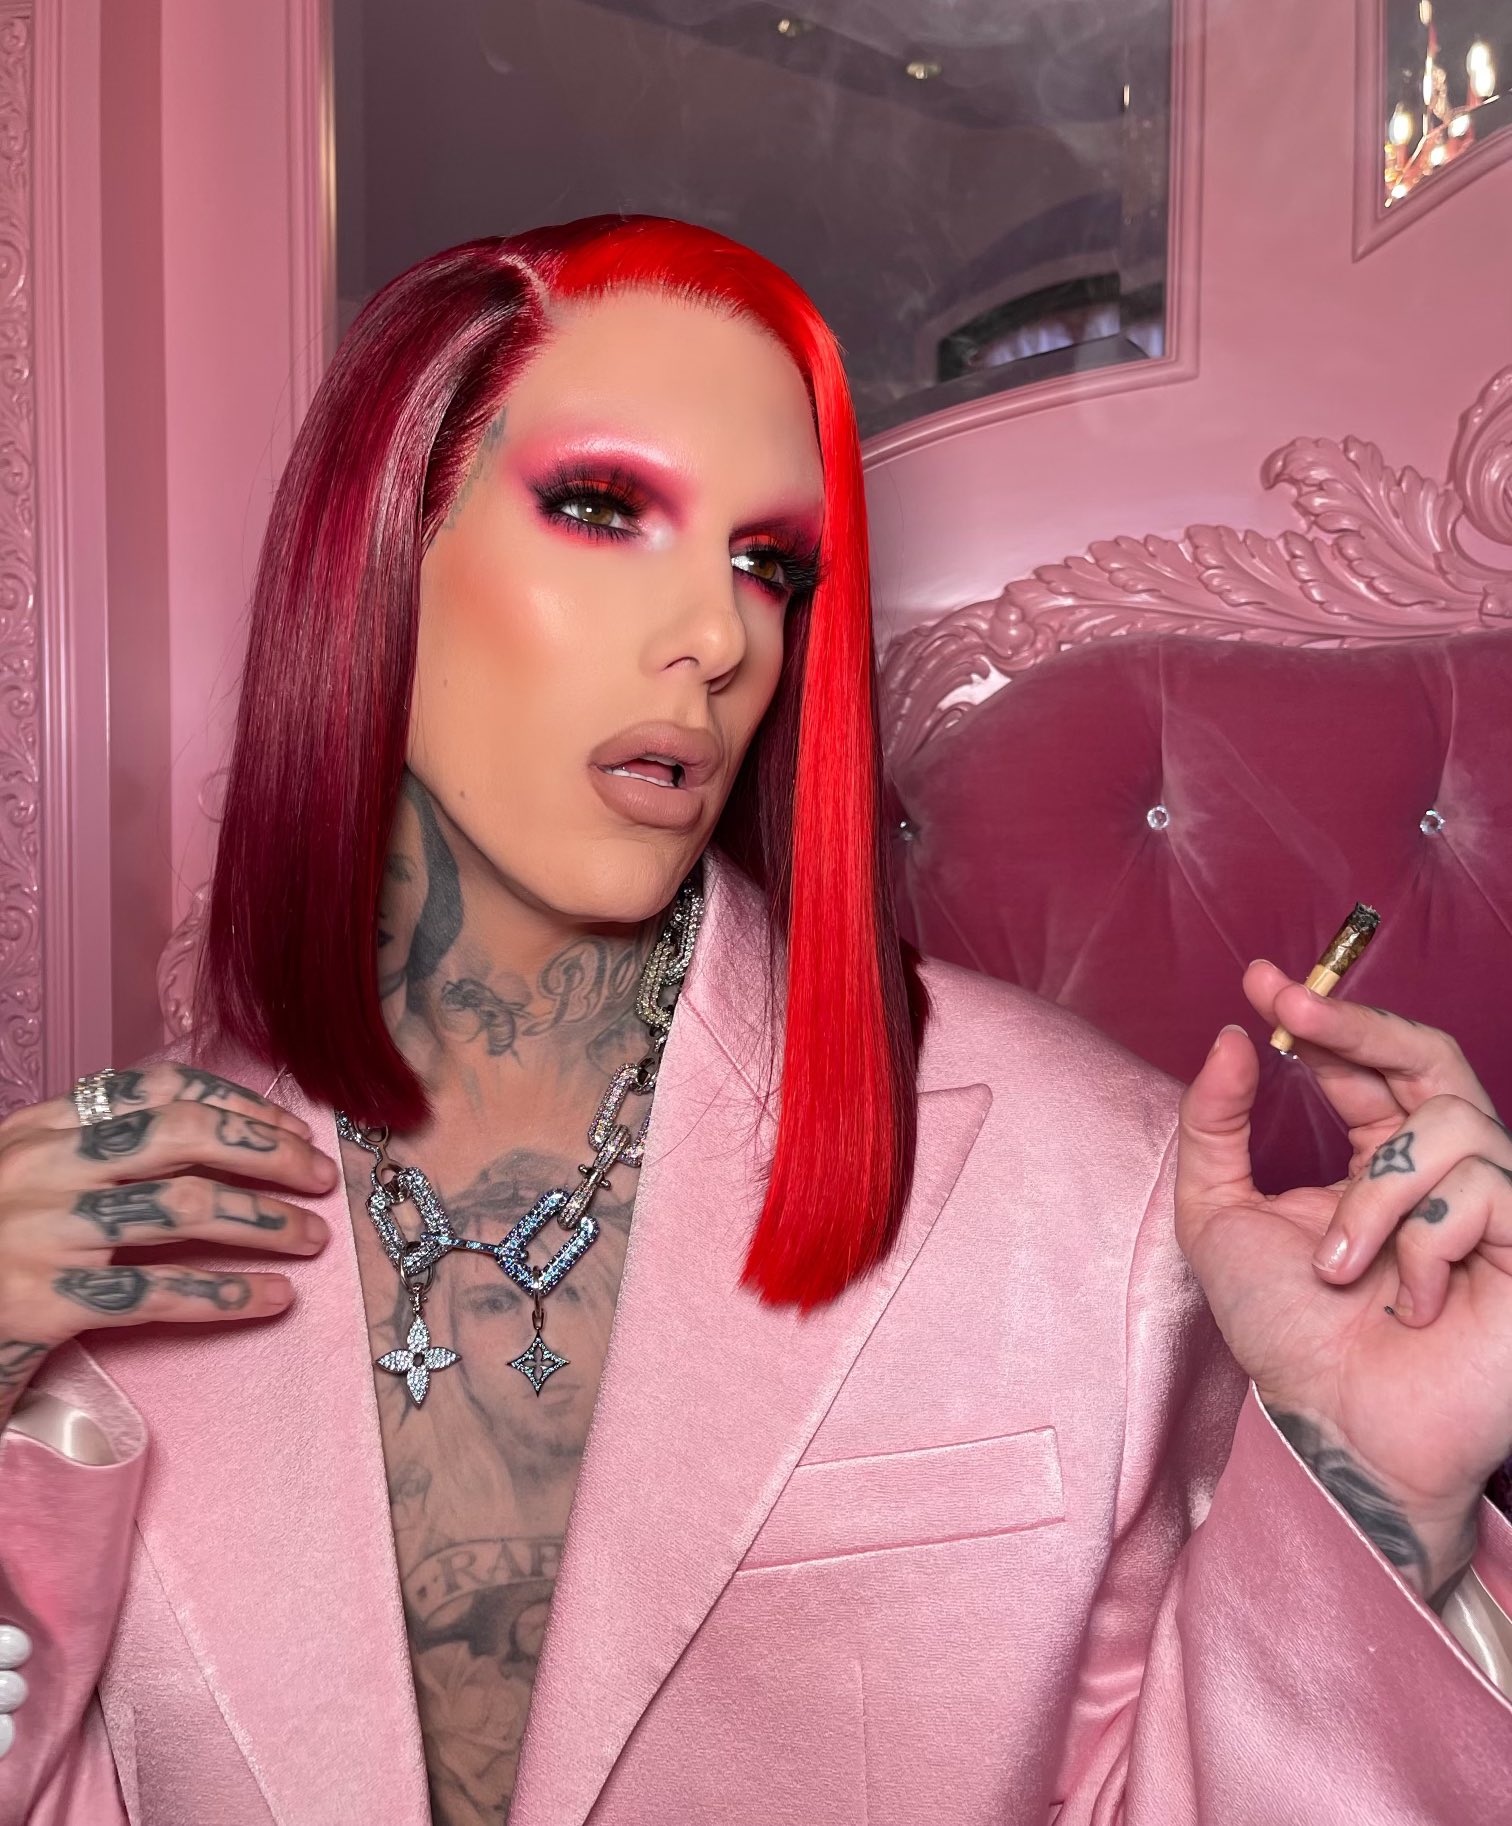 Jeffree Star to open first-ever retail store in Wyoming - Dexerto